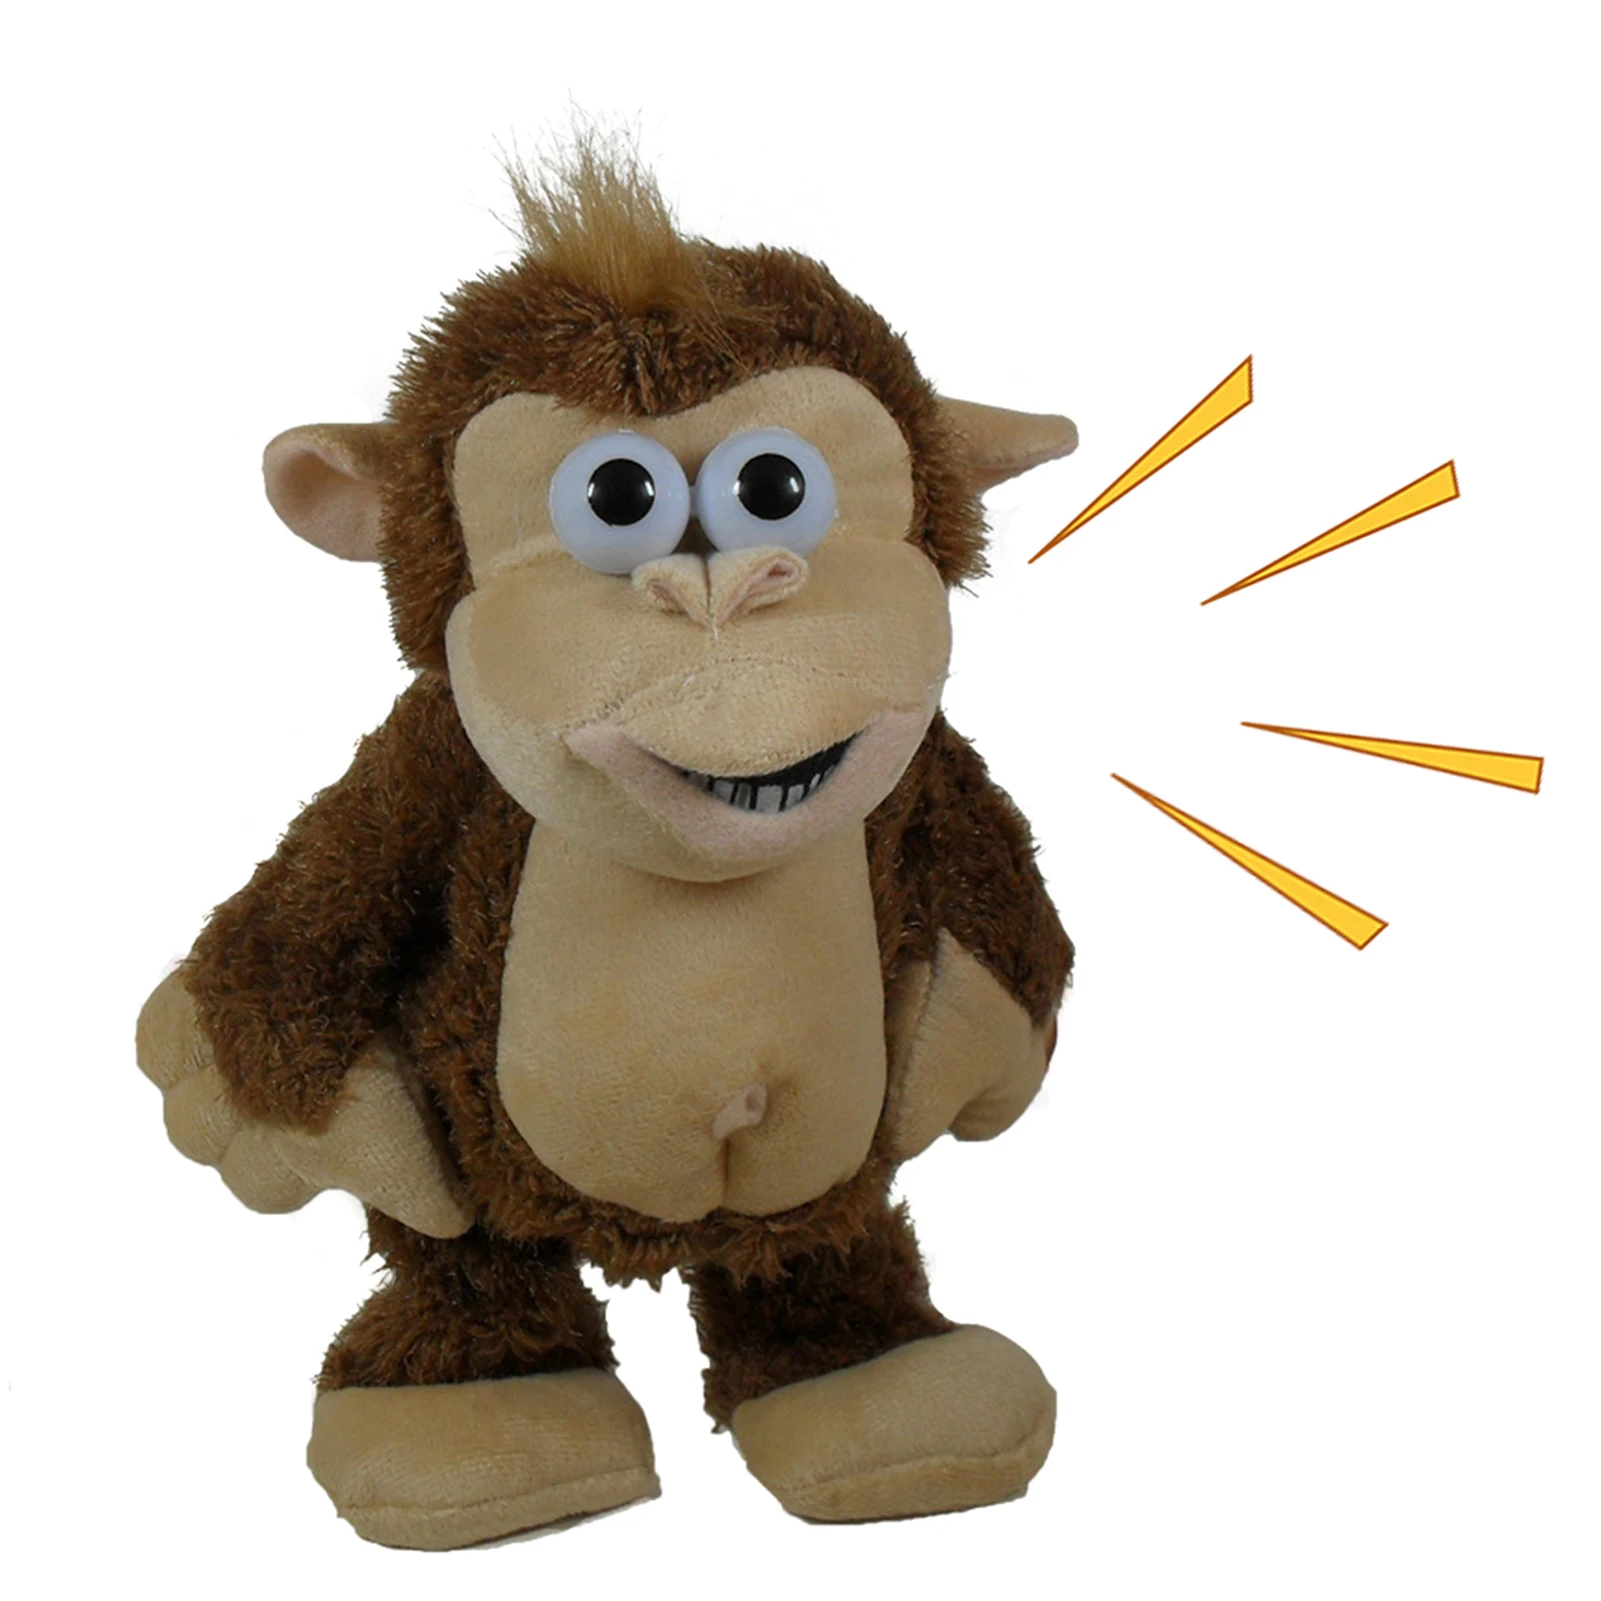 Details about   Hasbro Fur Real Friends Clapping Mechanical Monkey Baby Chimp Plush Toy Works 